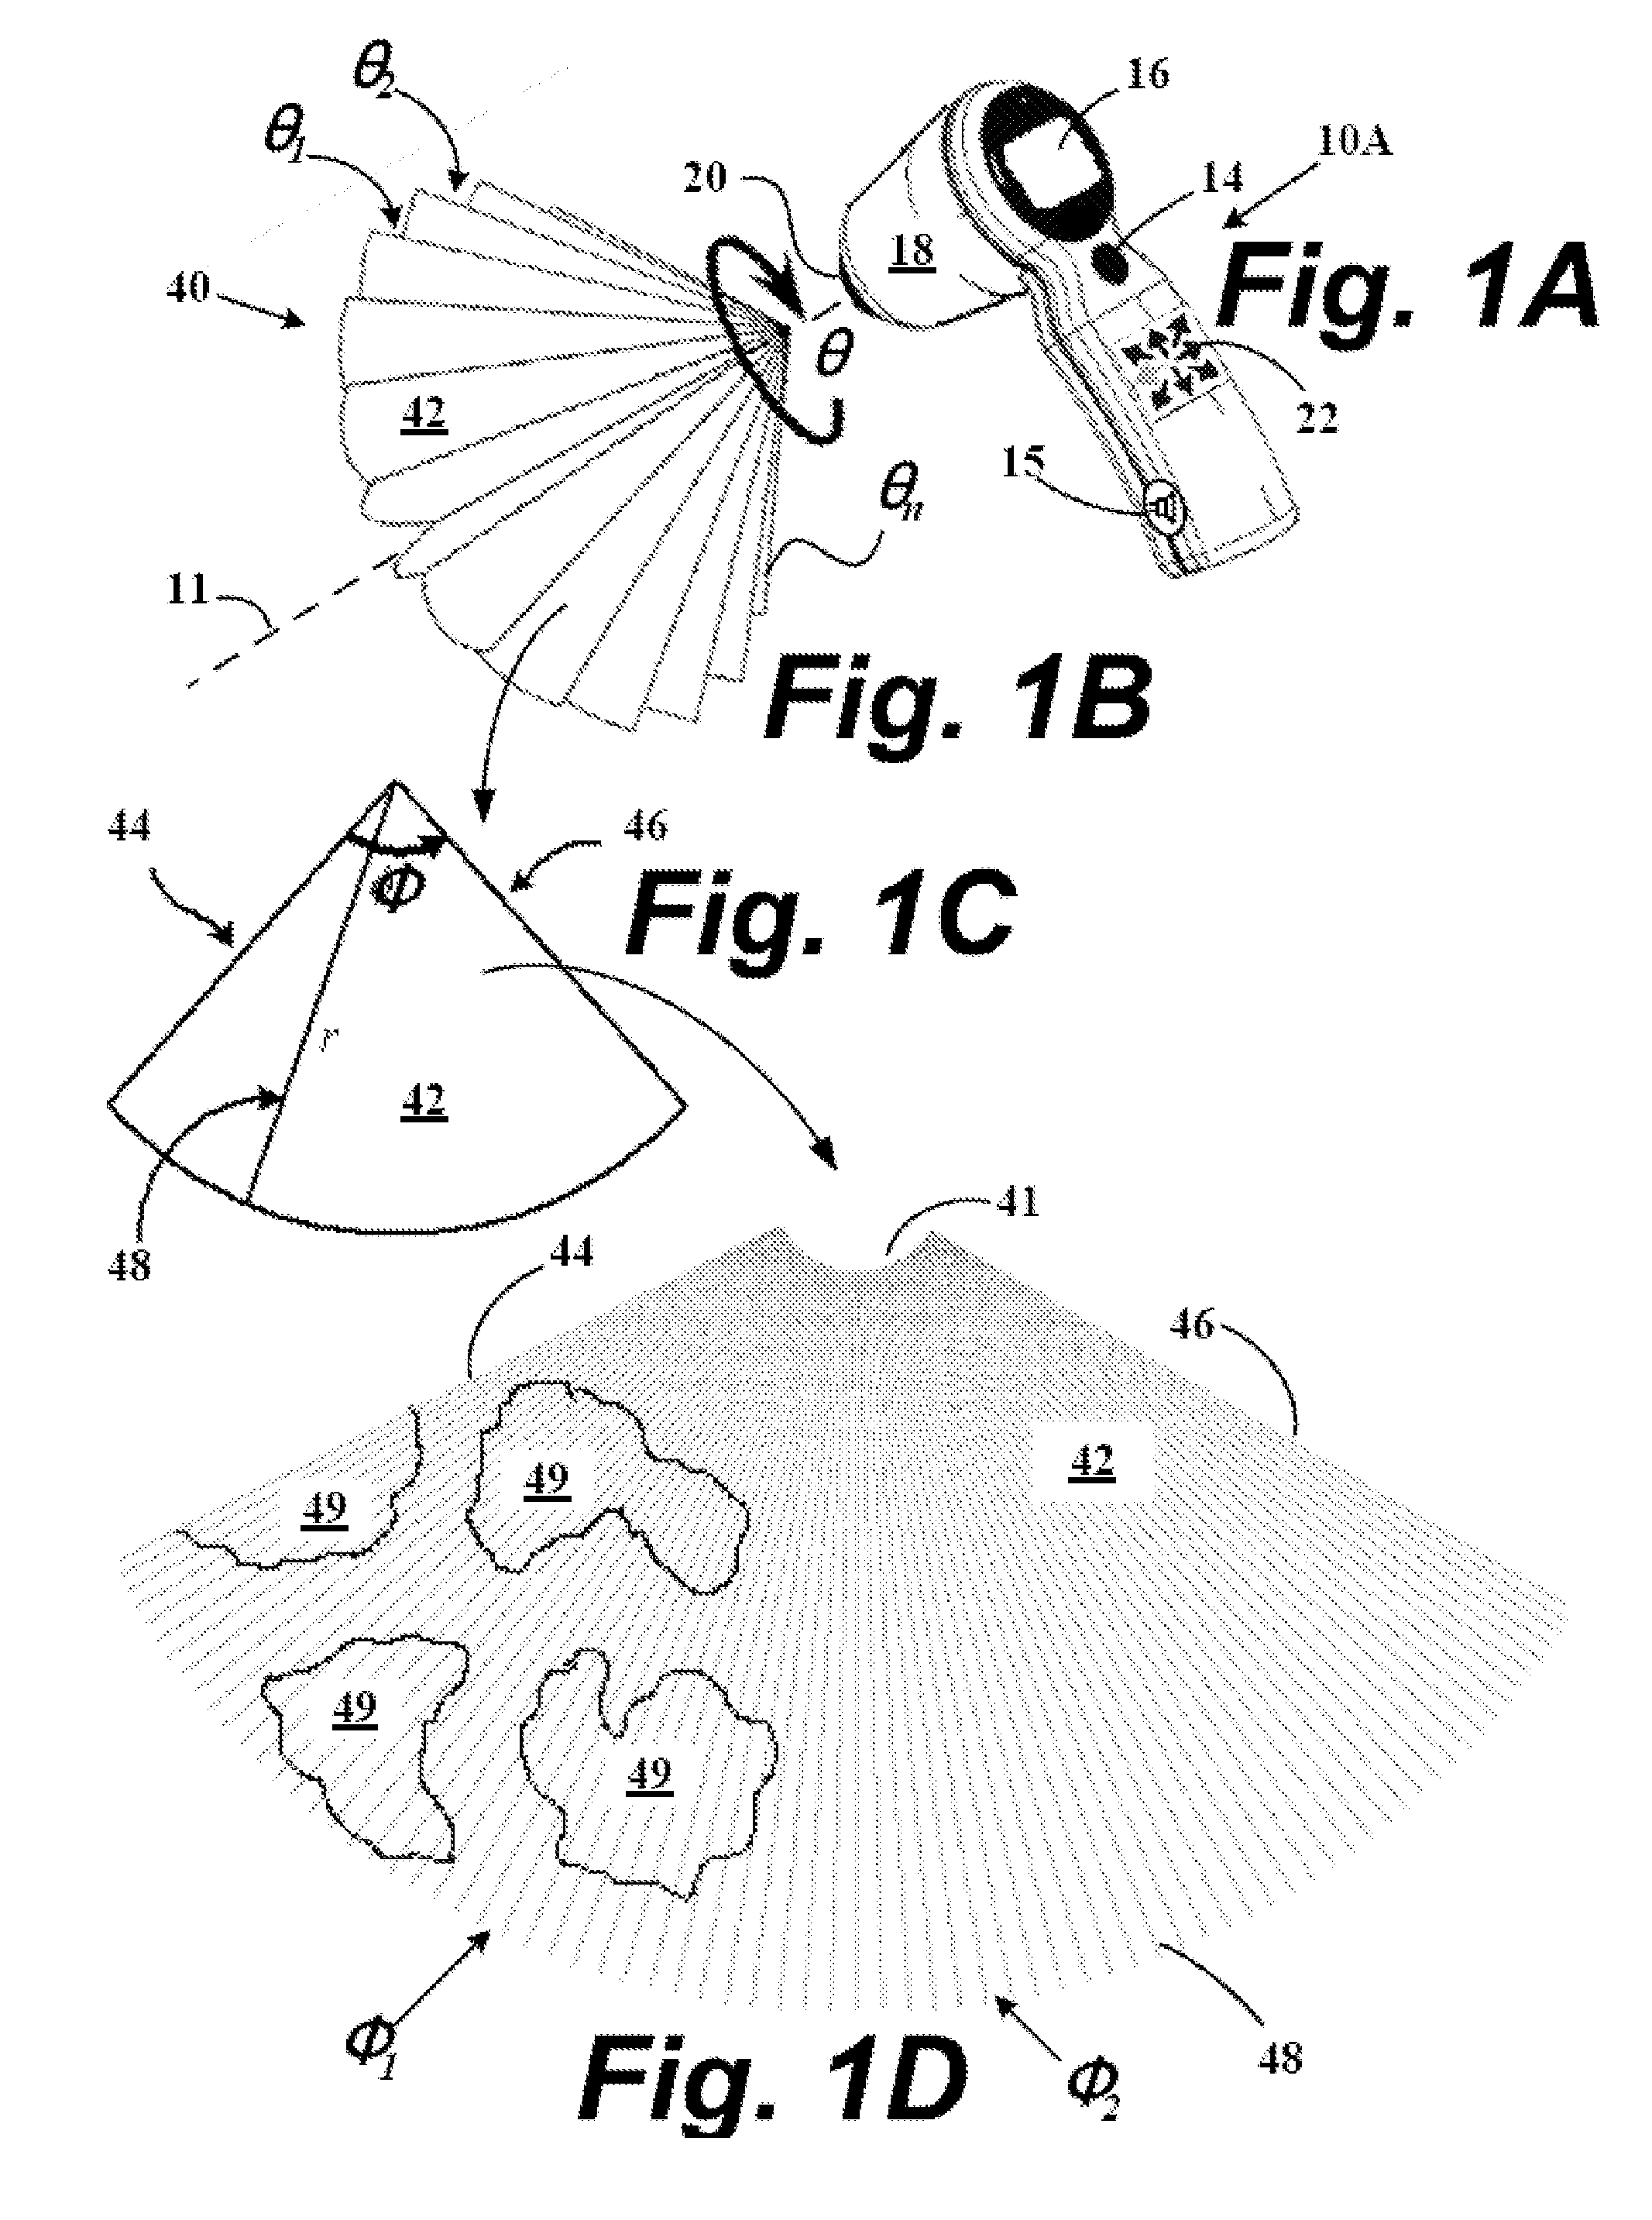 System and method to identify and measure organ wall boundaries